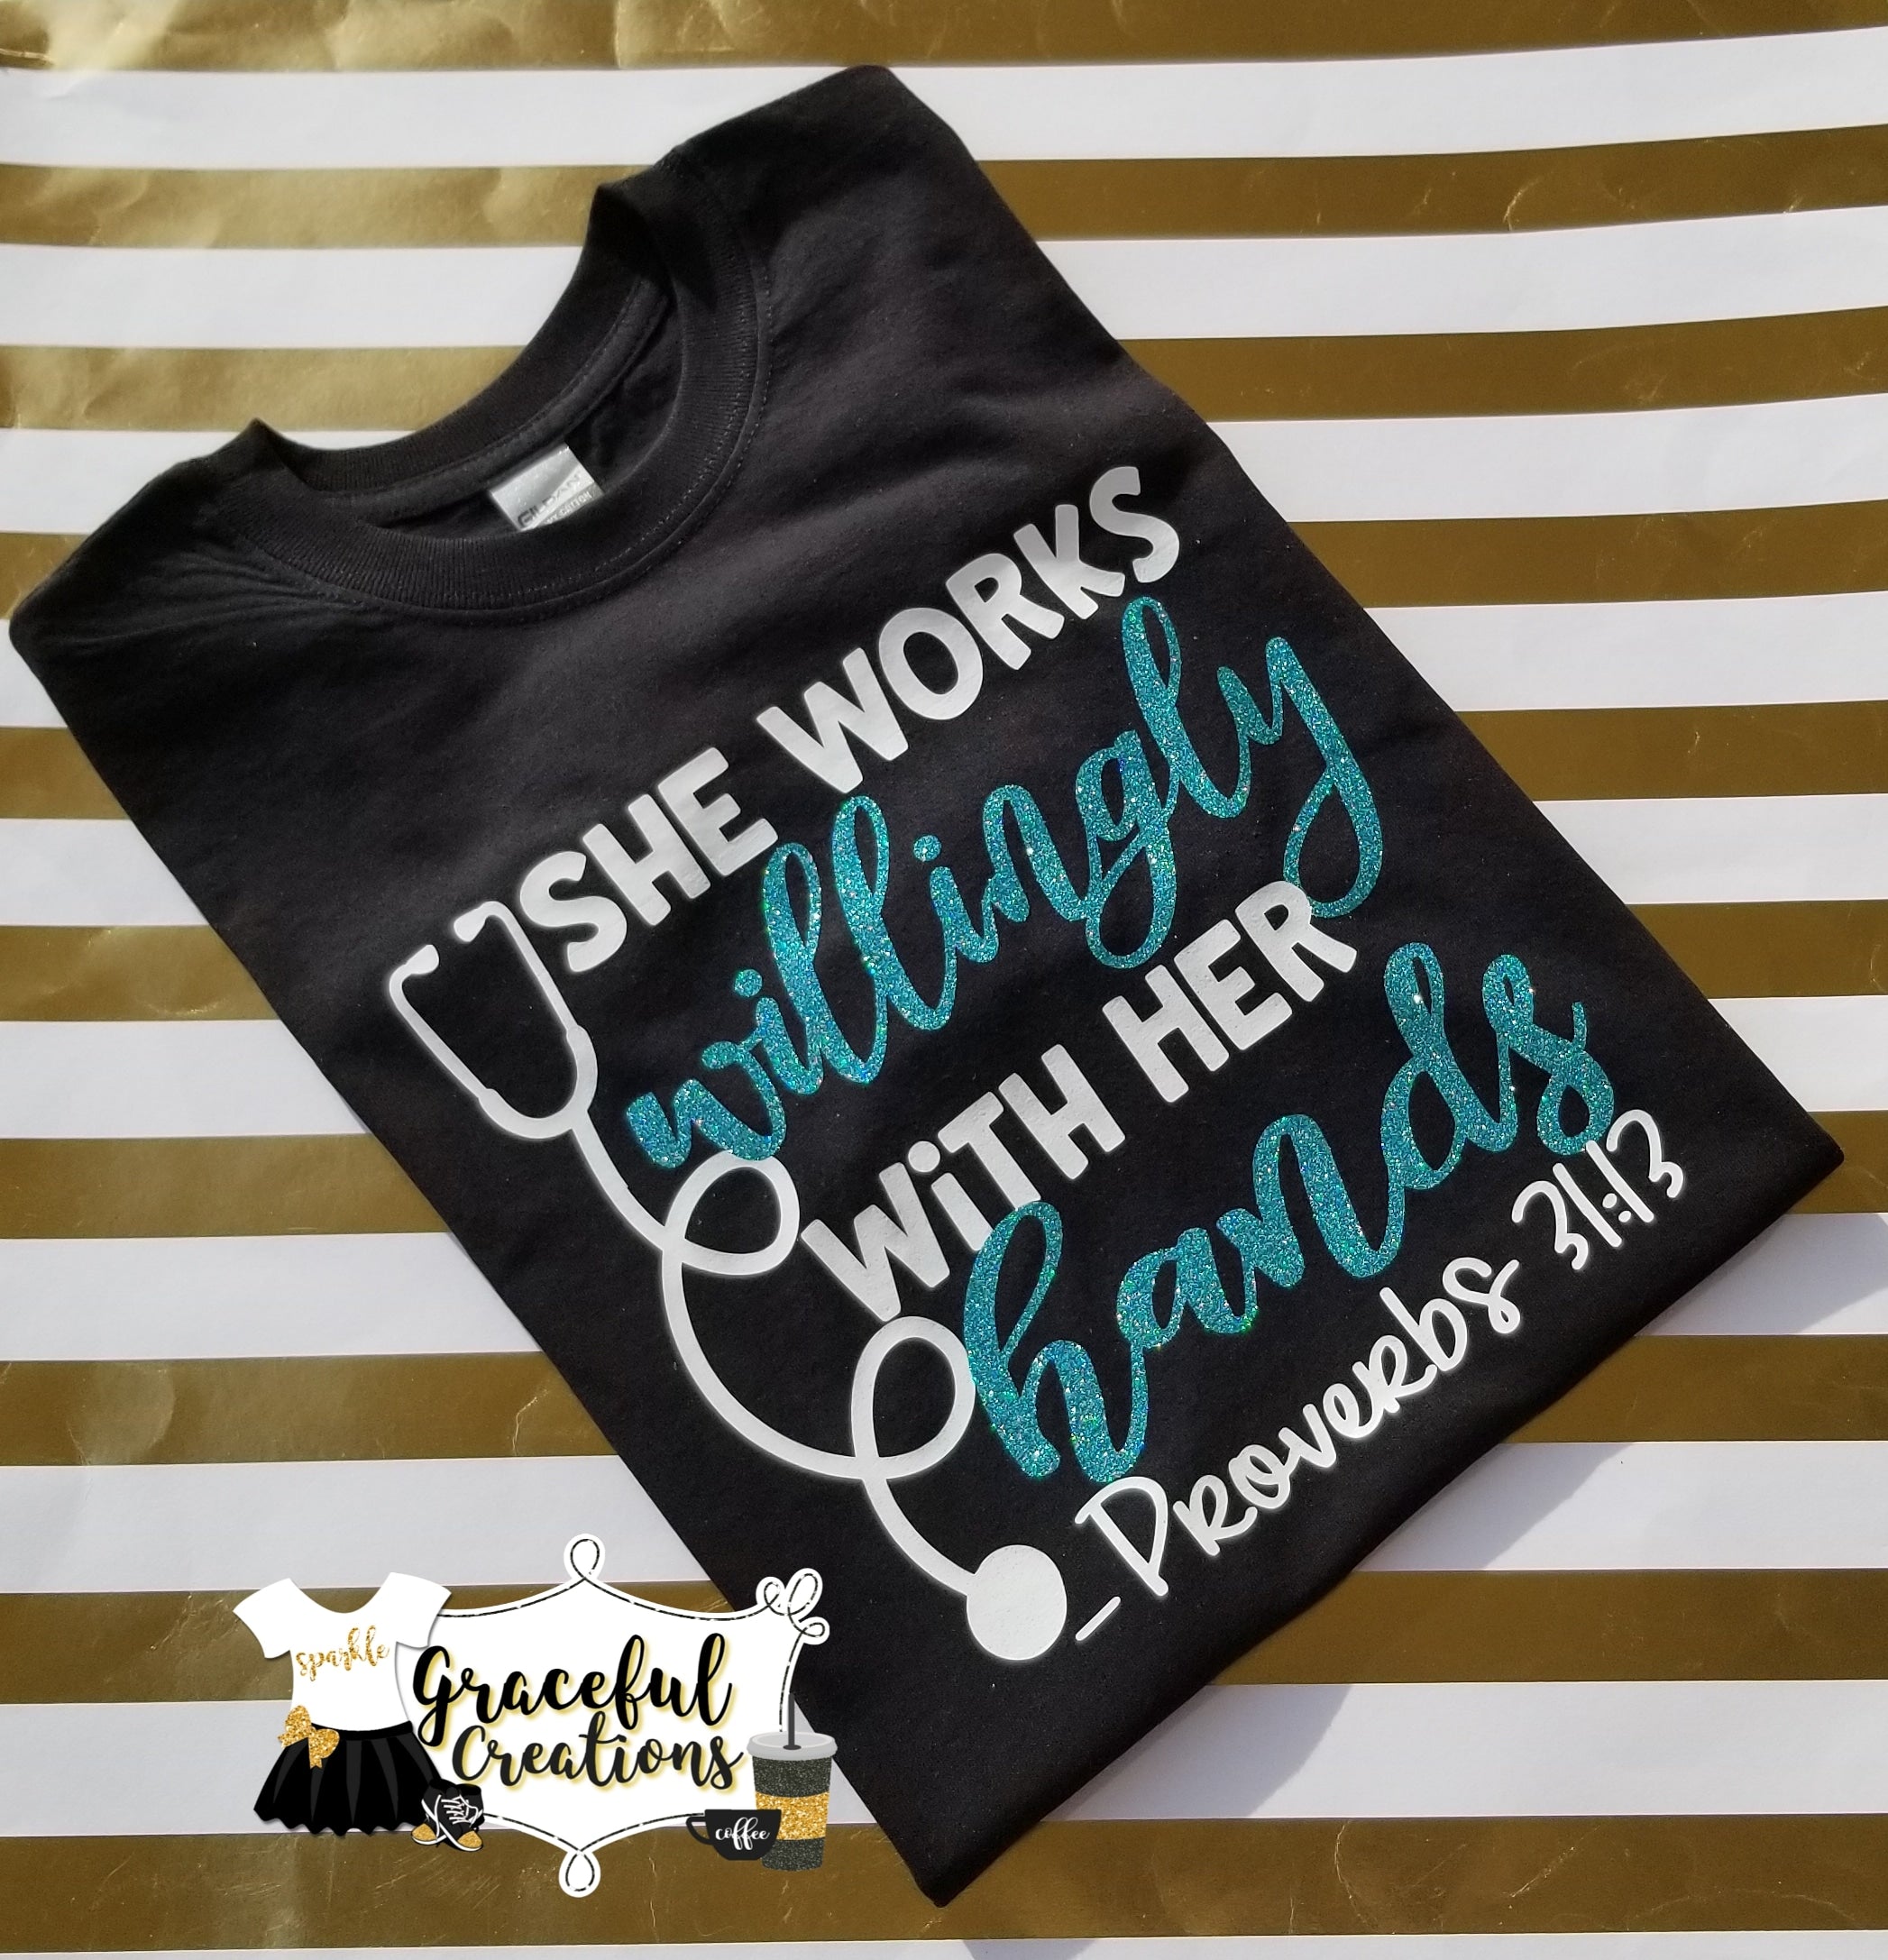 She Works Willingly With Her Hands - Medical, Personalized, Custom T-Shirt